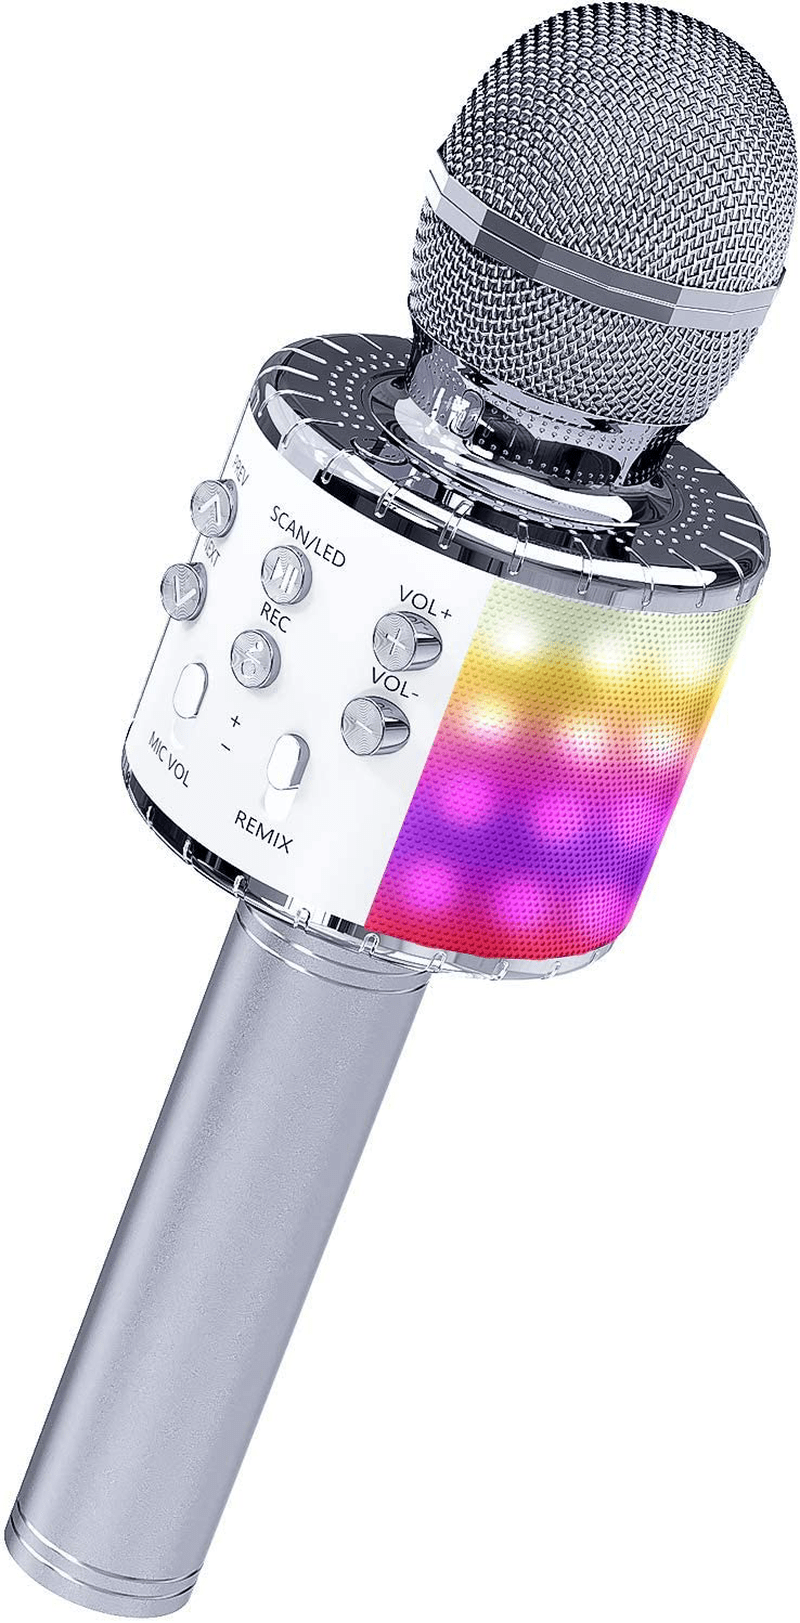 OVELLIC Karaoke Microphone for Kids, Wireless Bluetooth Karaoke Microphone with LED Lights, Portable Handheld Mic Speaker Machine, Great Gifts Toys for Girls Boys Adults All Age (Rose Gold) Electronics > Audio > Audio Components > Microphones OVELLIC Silver  